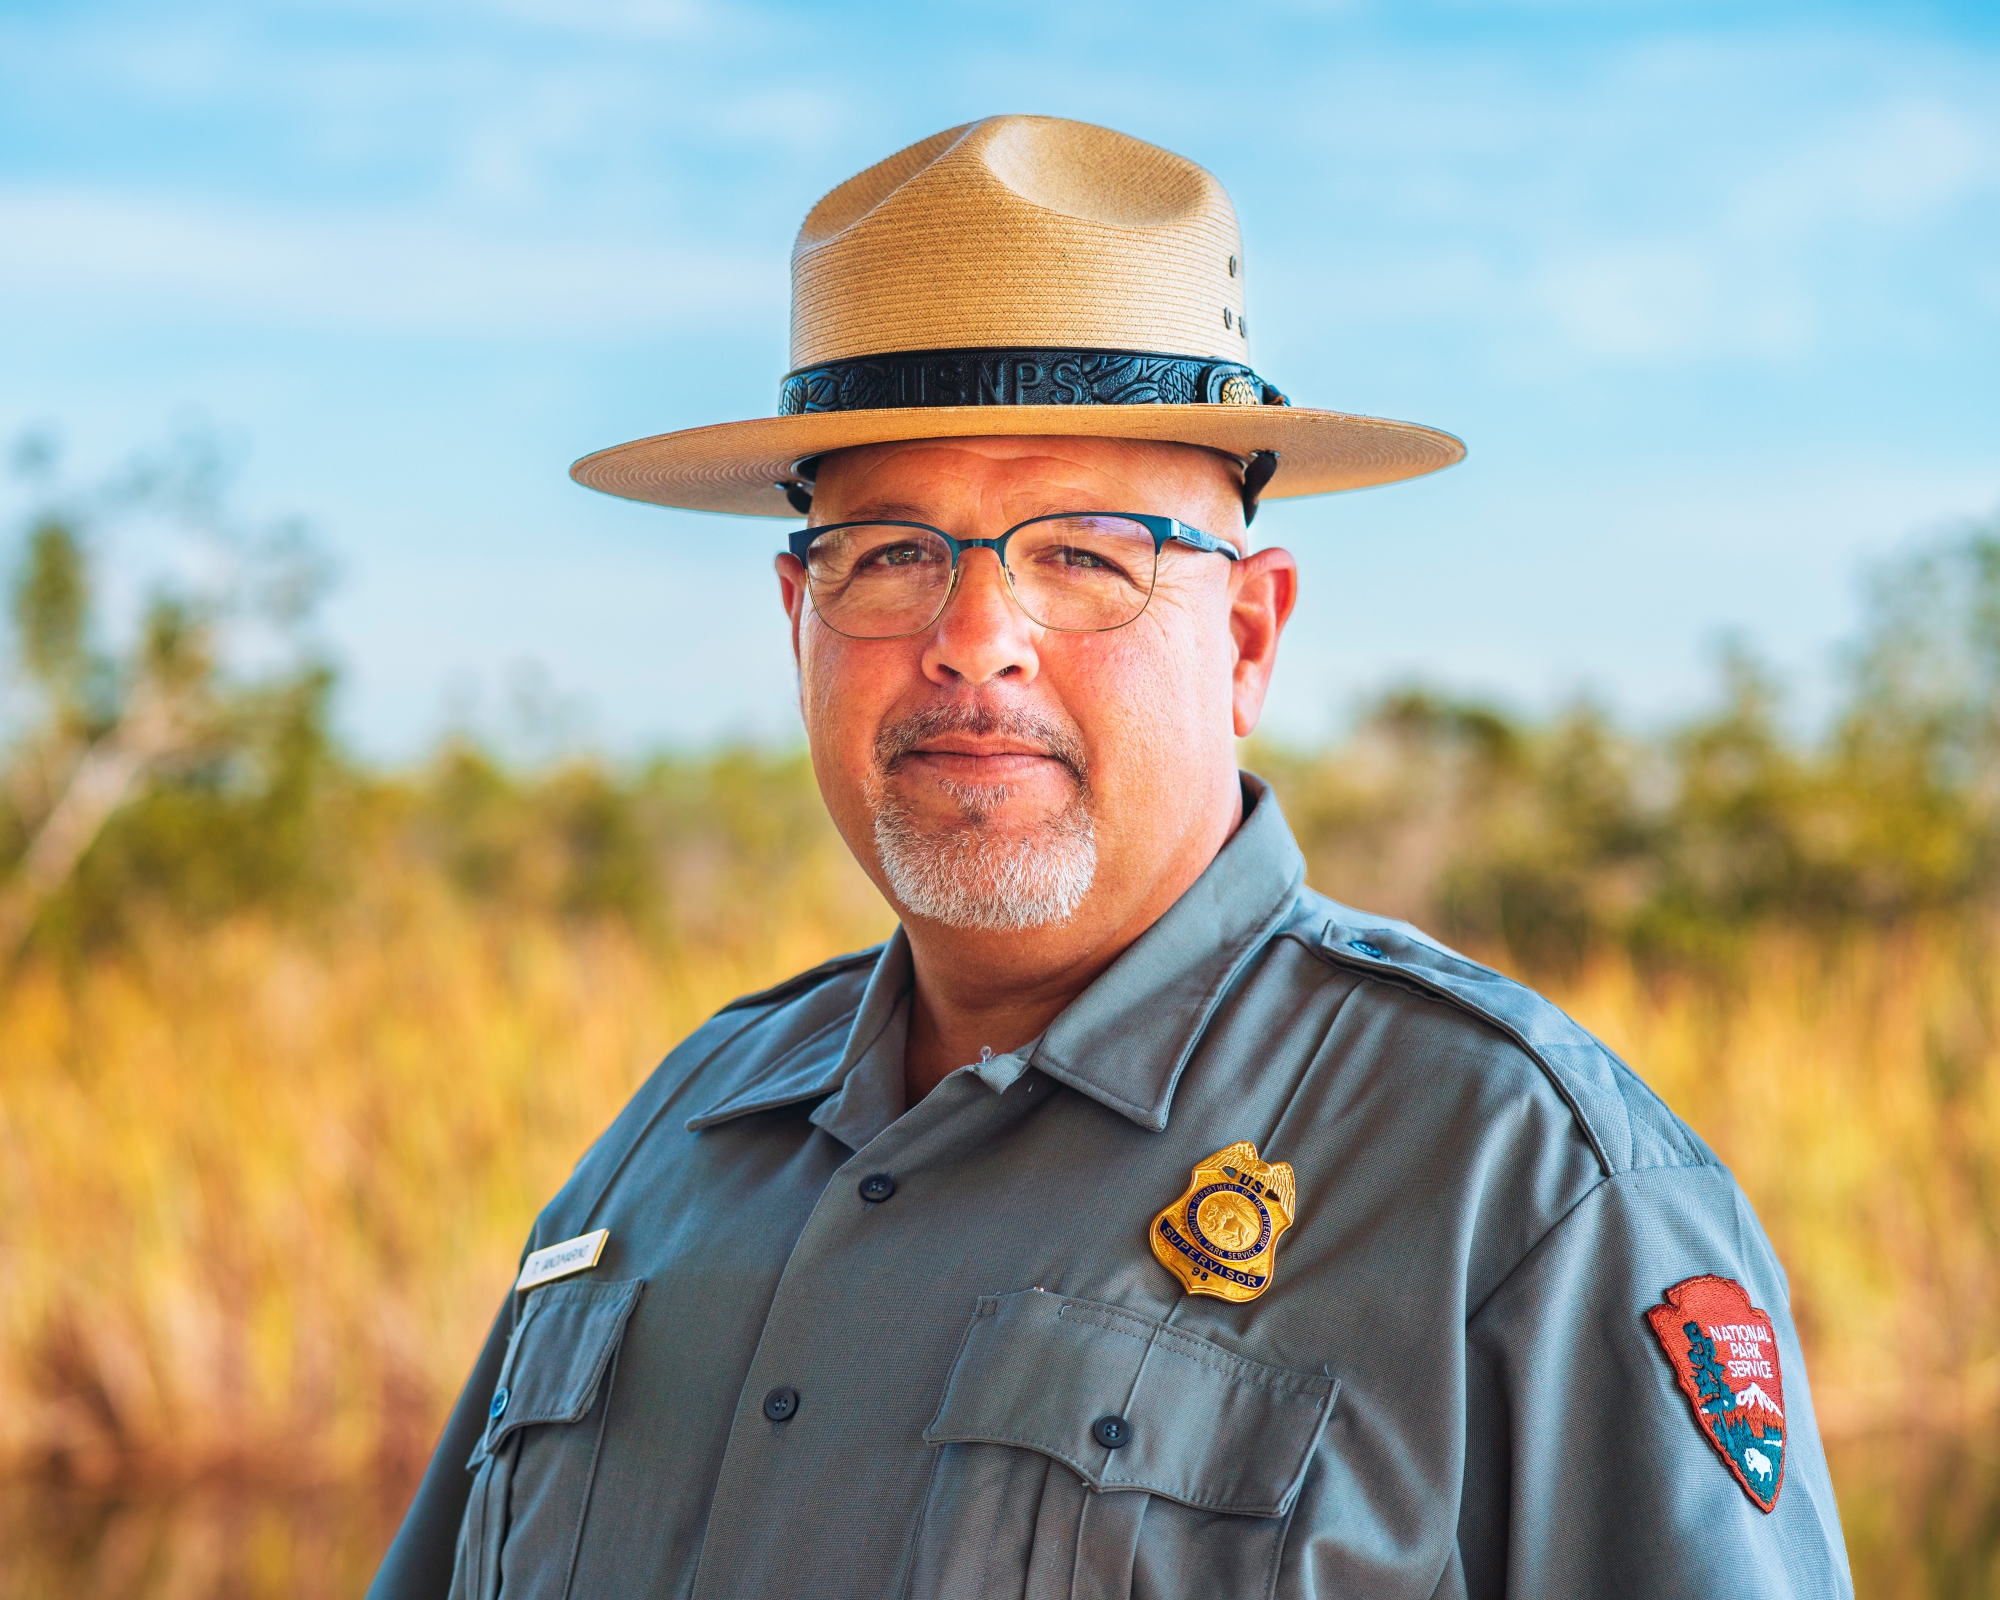 Head shot of a male park ranger in uniform with classic ranger hat with wide-brim and dark band.